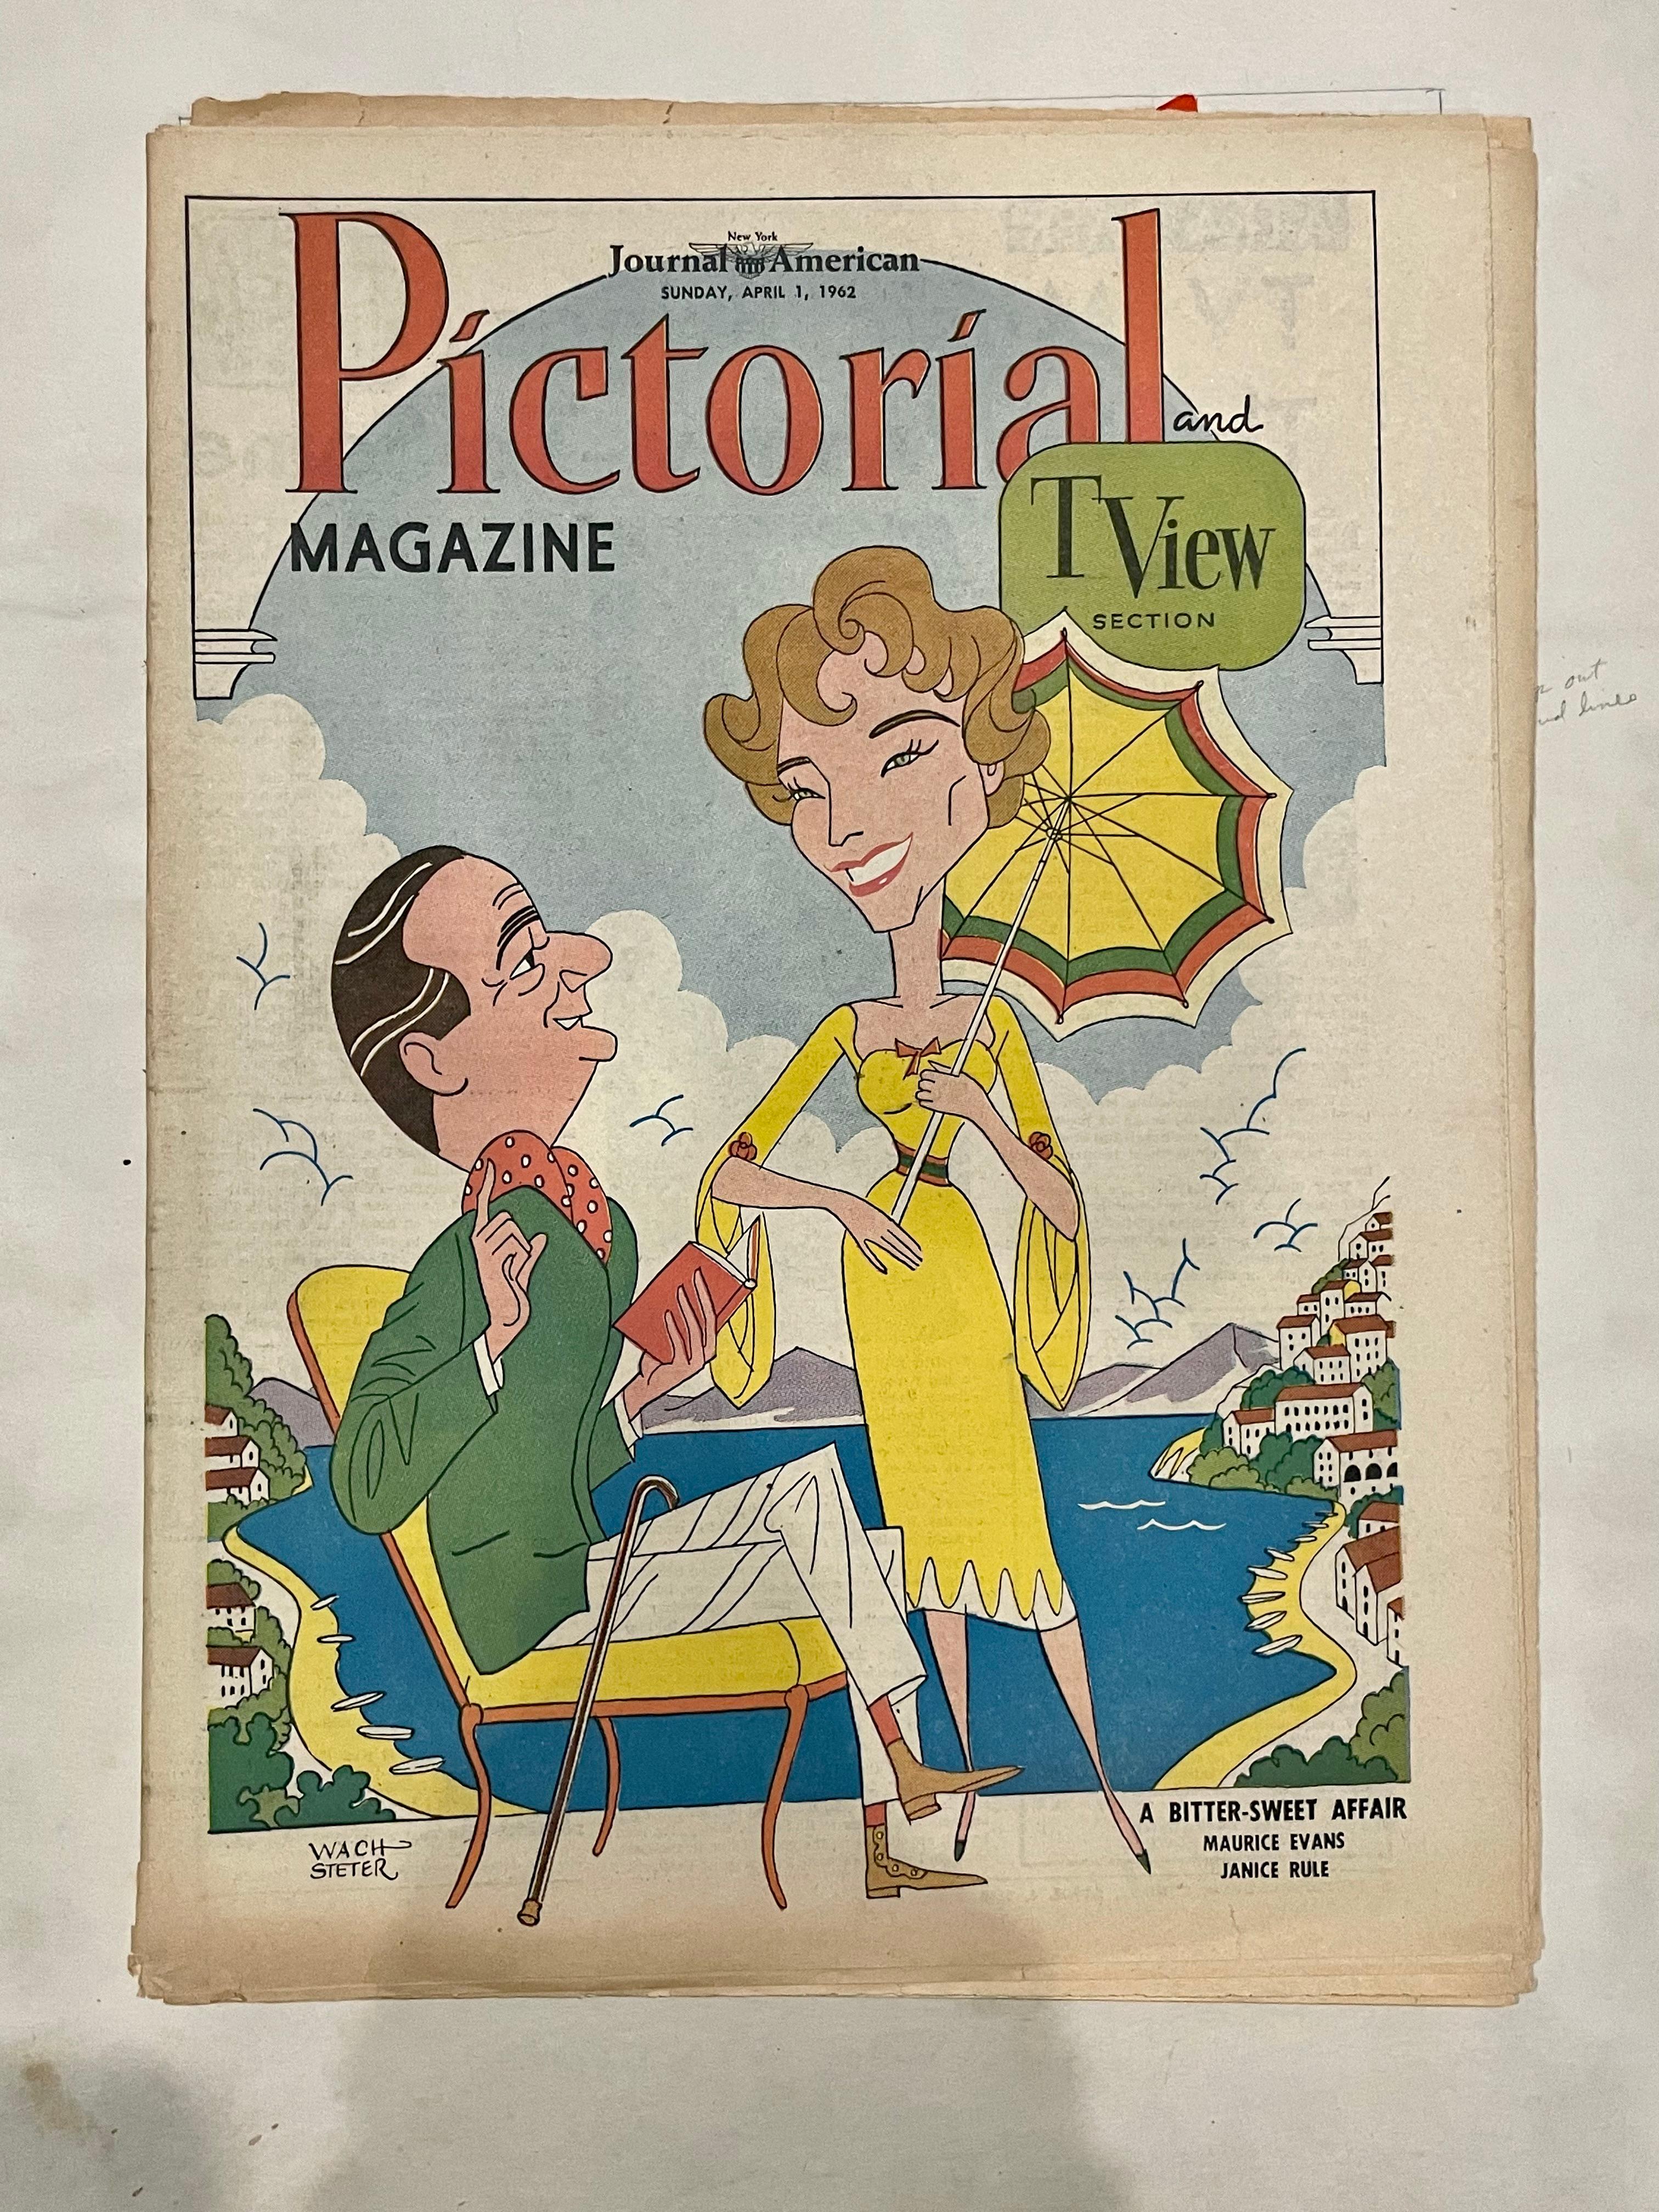 Signed Lower Right by Artist

CARICATURE - George Wachsteter (1911-2004) Ink and Pencil on Illustration Board with Color Overlay Caricature Cover Design of Maurice Evans and Janice Rule, 14